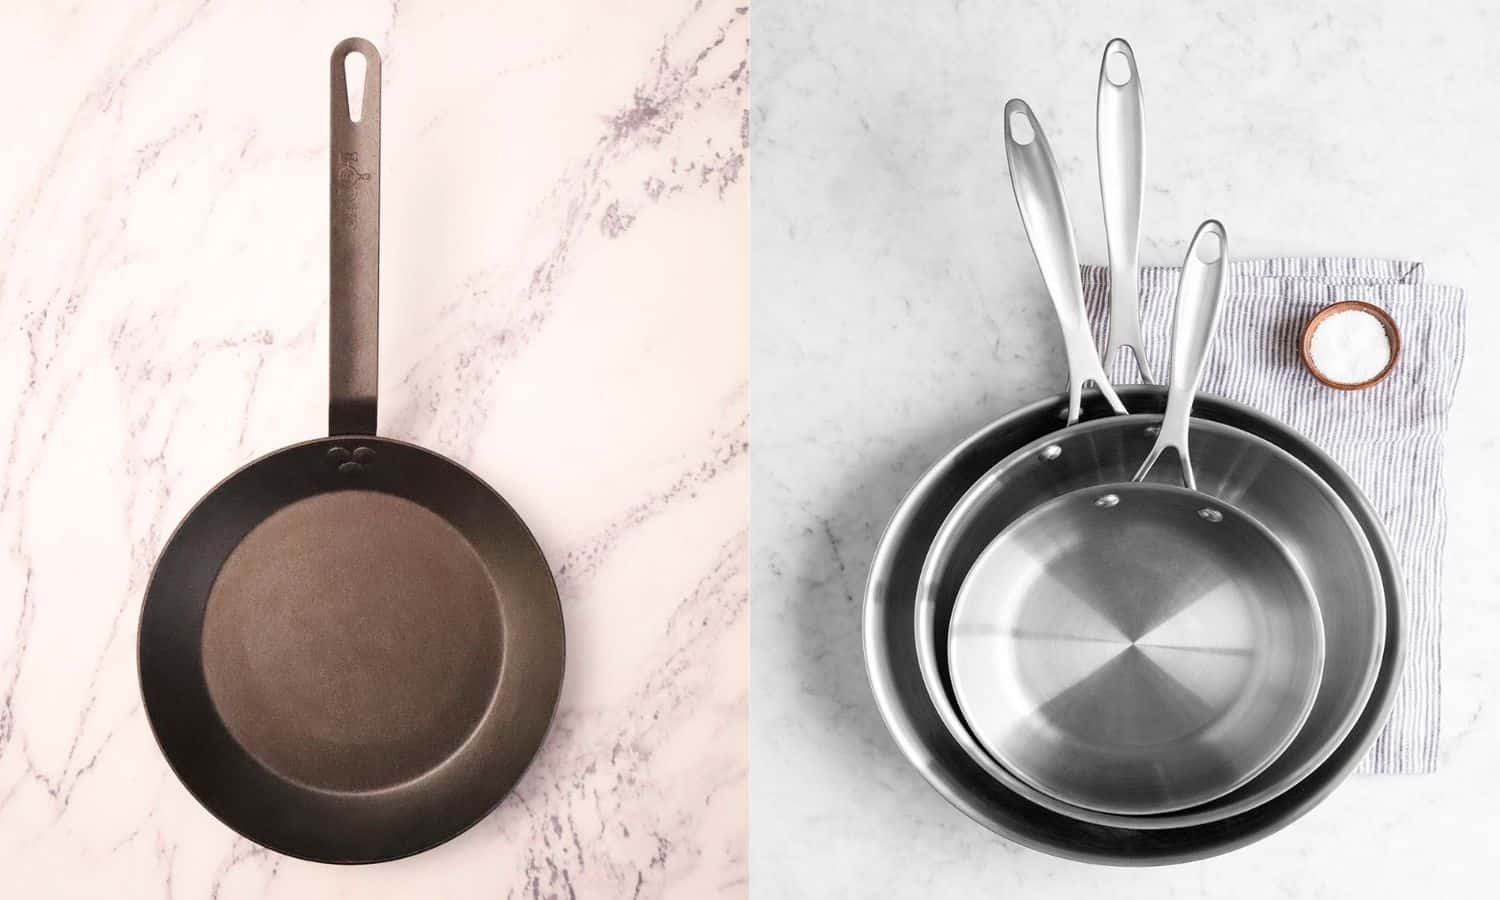 carbon steel vs stainless steel cookware